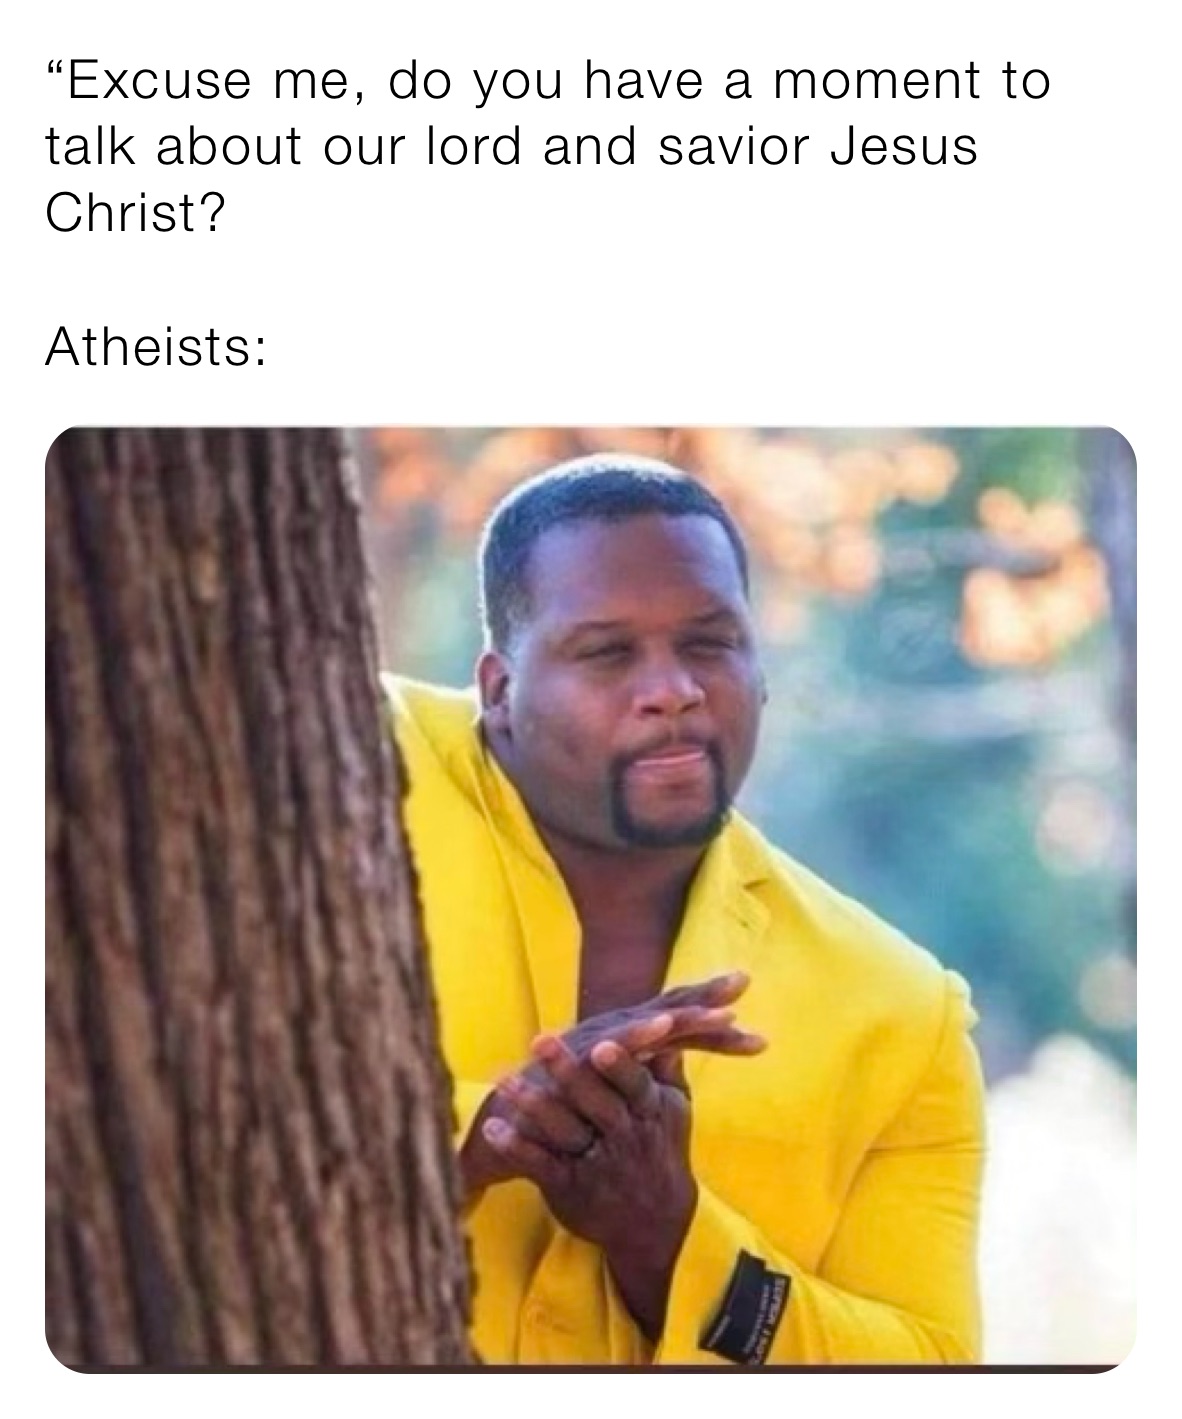 “Excuse me, do you have a moment to talk about our lord and savior Jesus Christ?

Atheists: